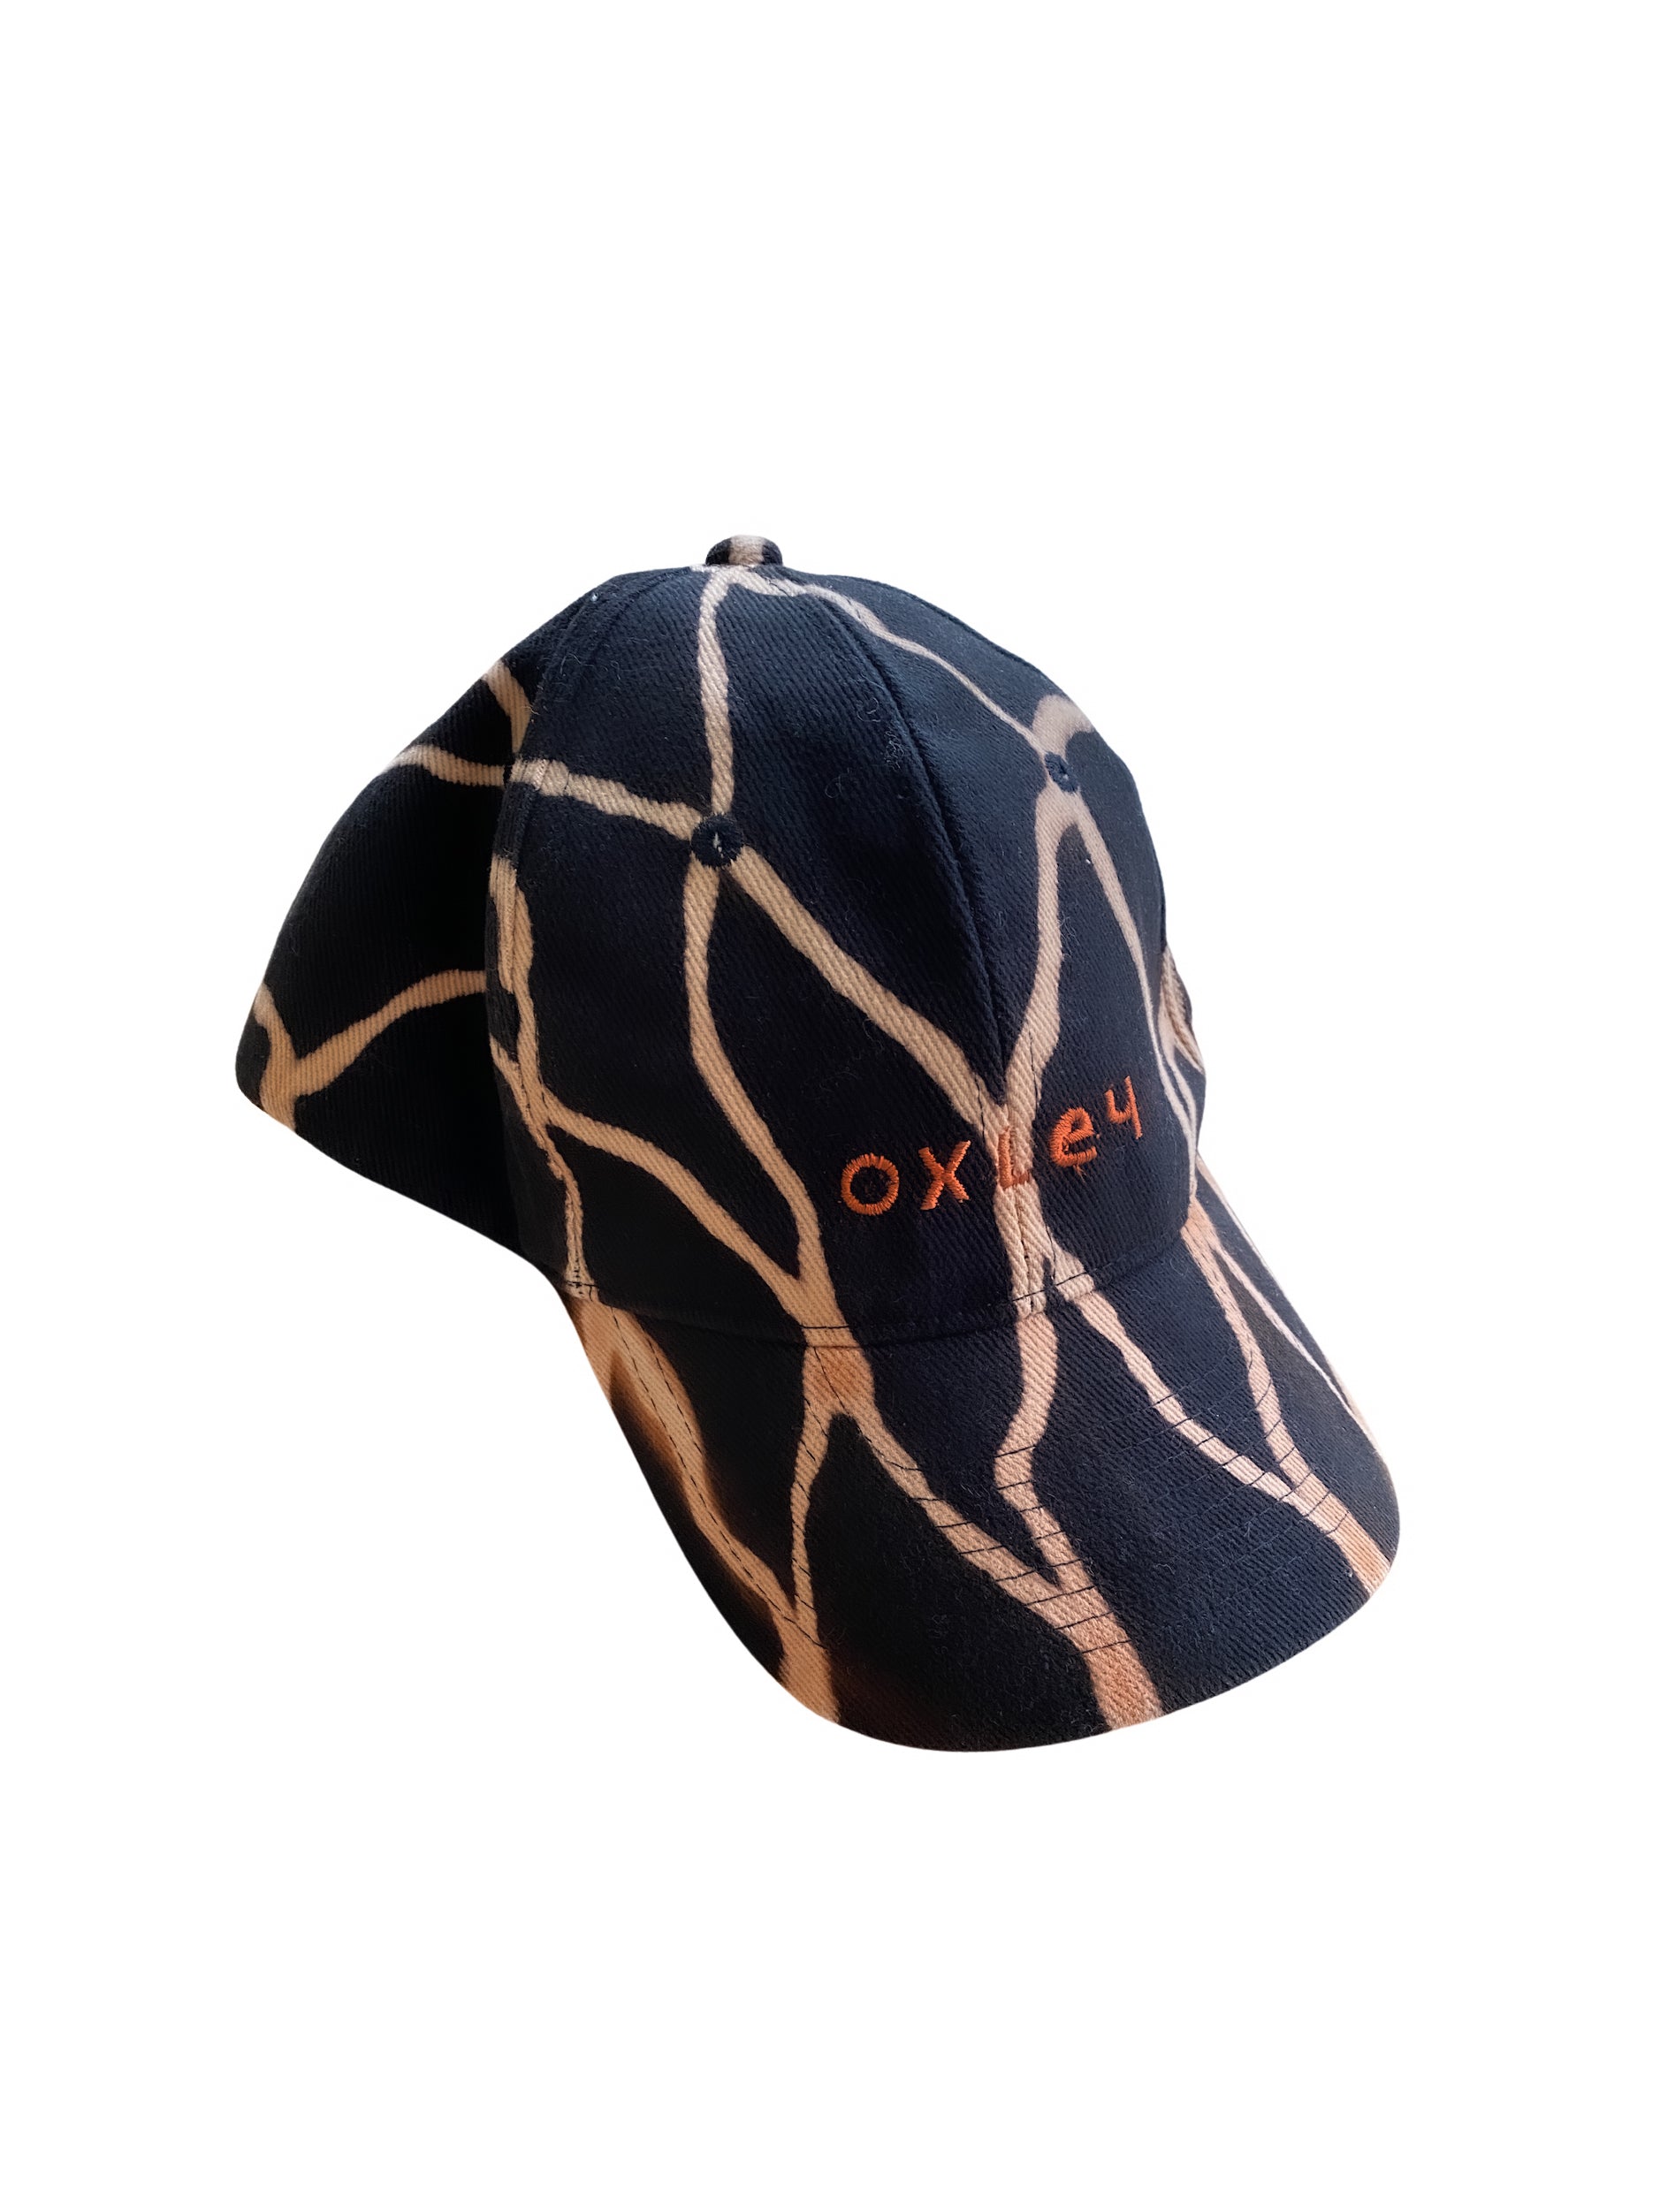 OXLEY HAND PRINTED CAP